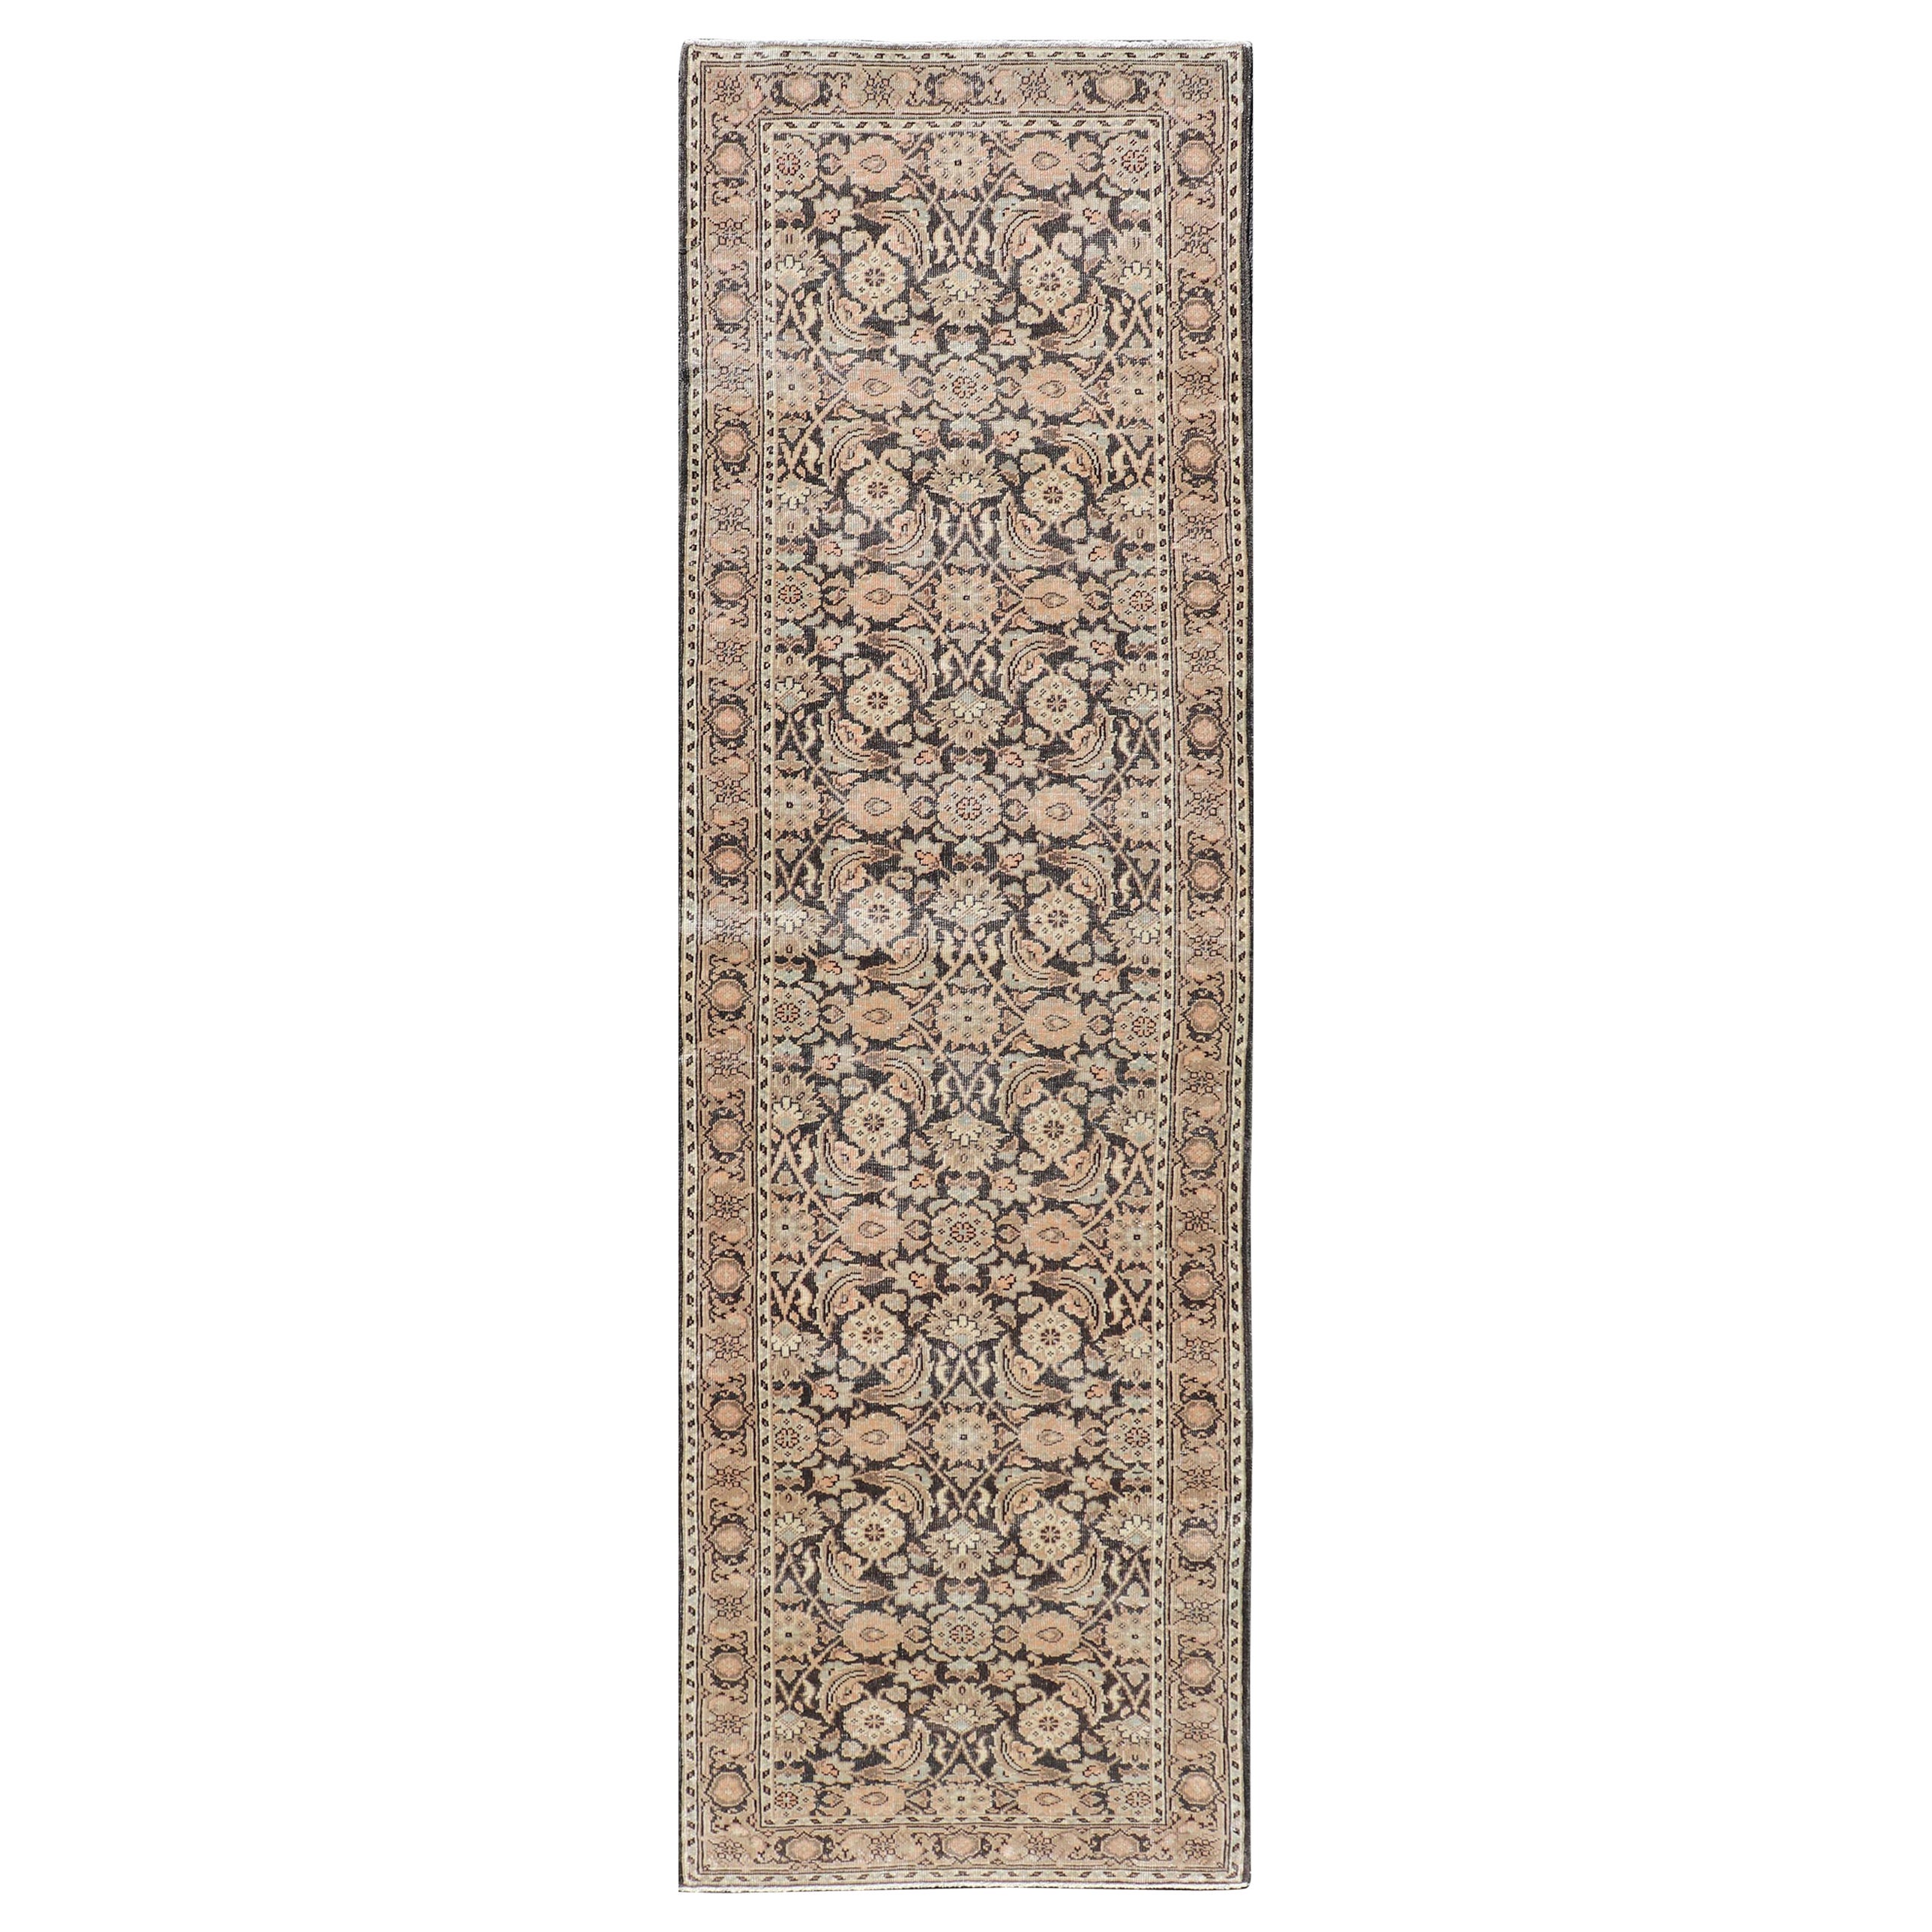 Antique Persian Tabriz Runner with Ornate Floral Design in Earthy Tones 